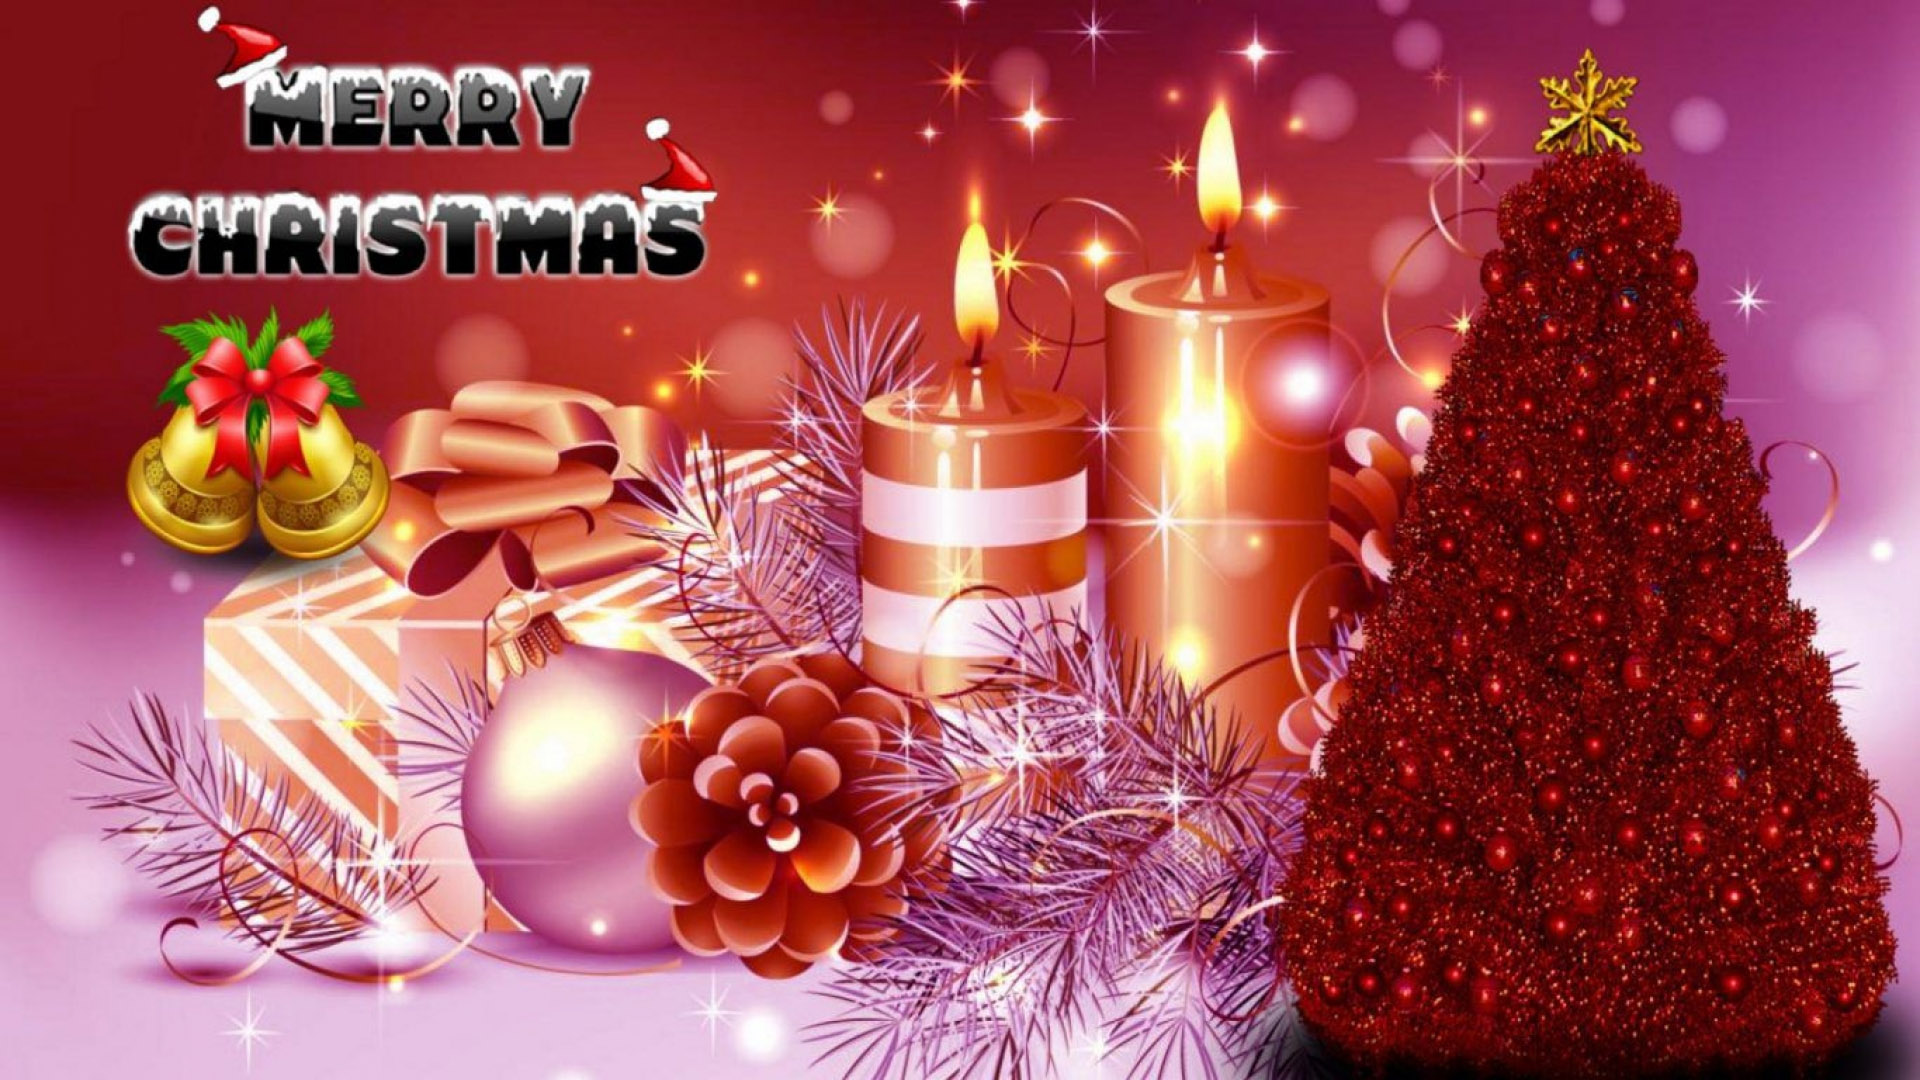 Best Christmas Cards Image Wallpaper